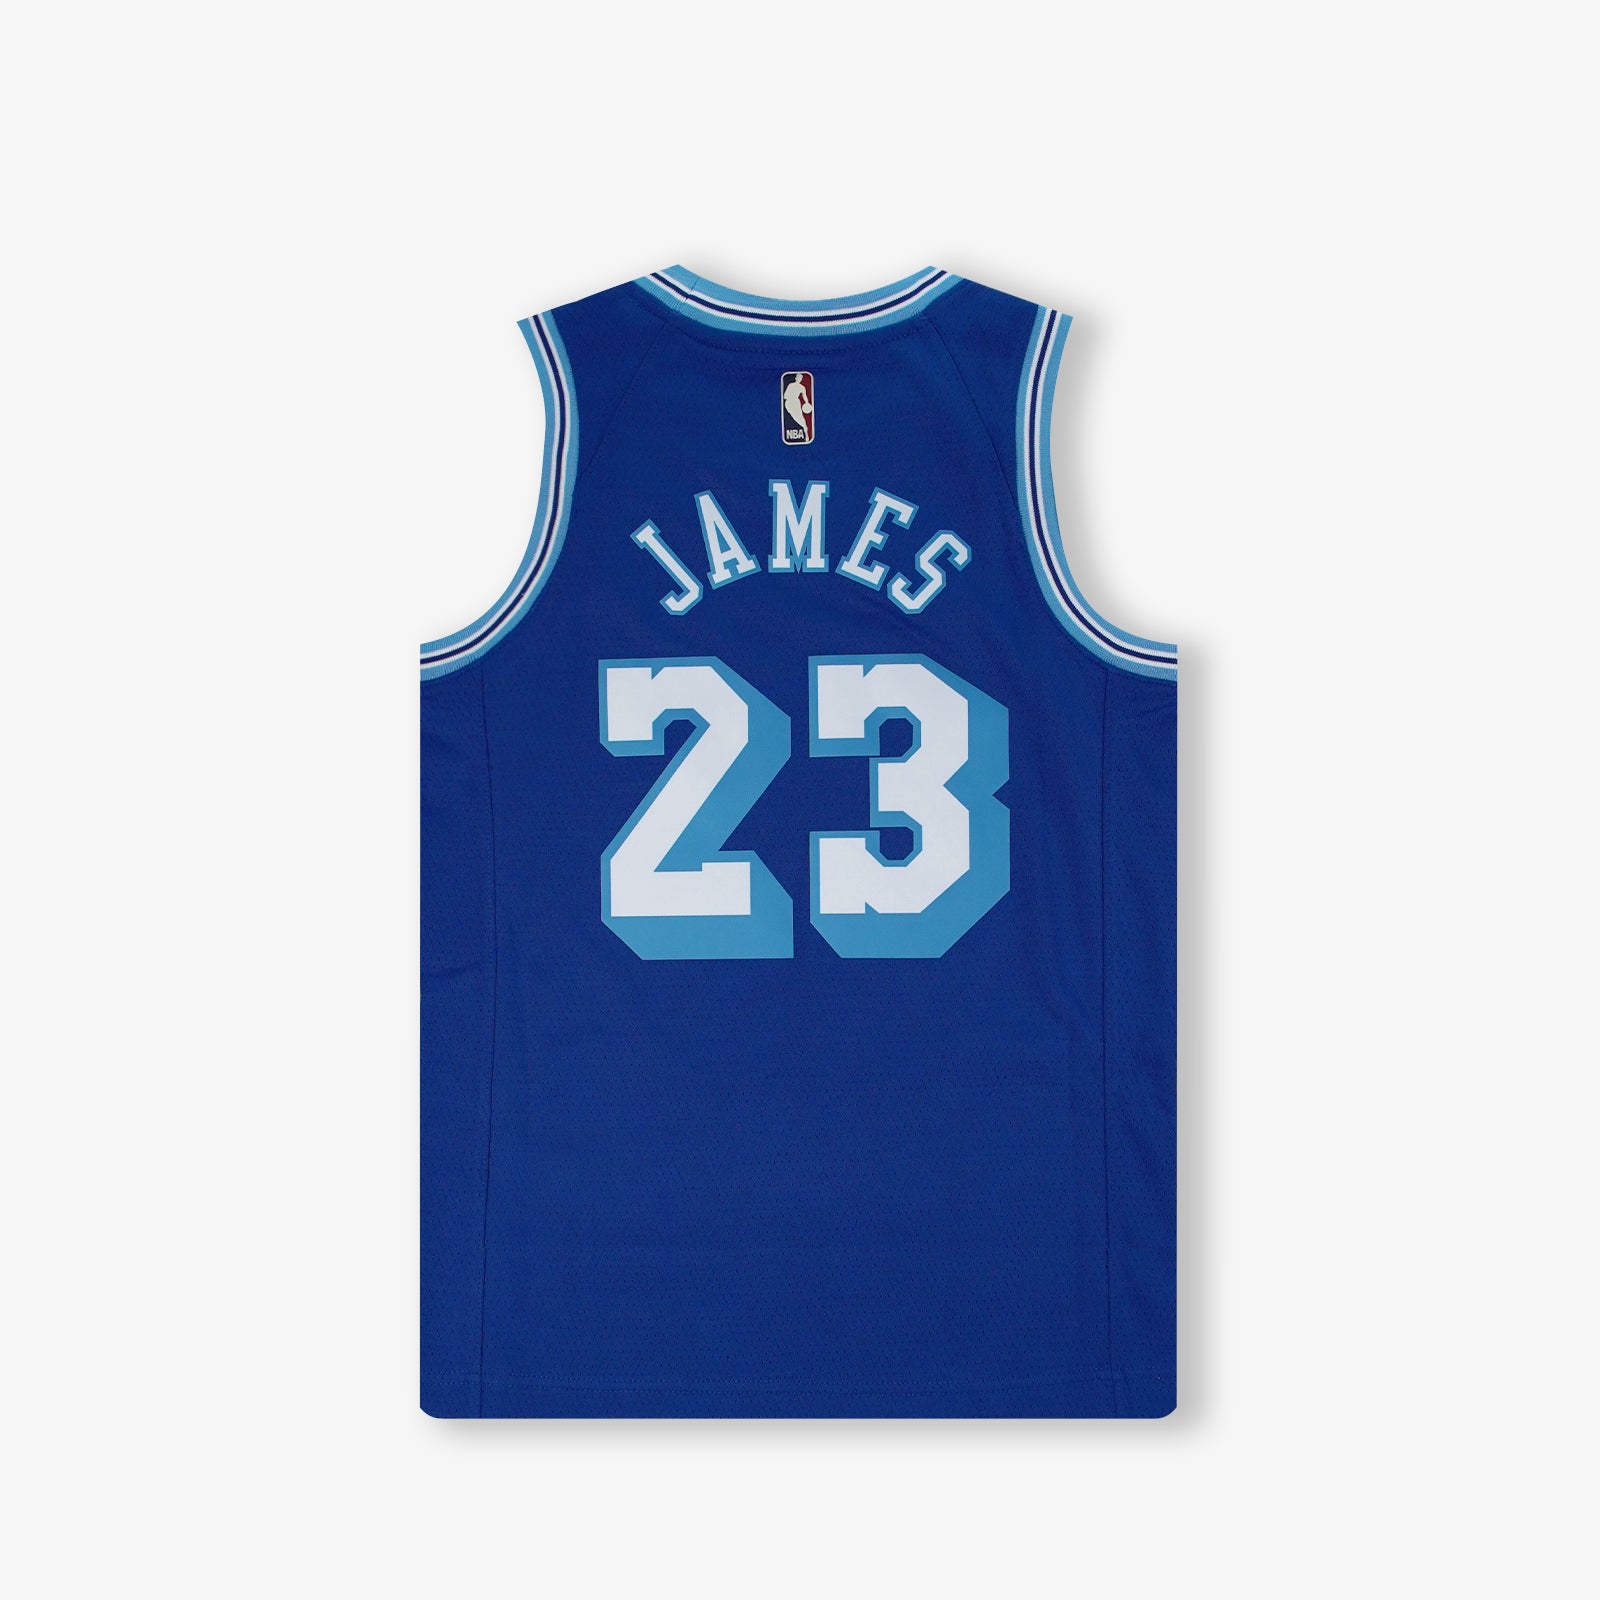 lebron james jersey youth lakers